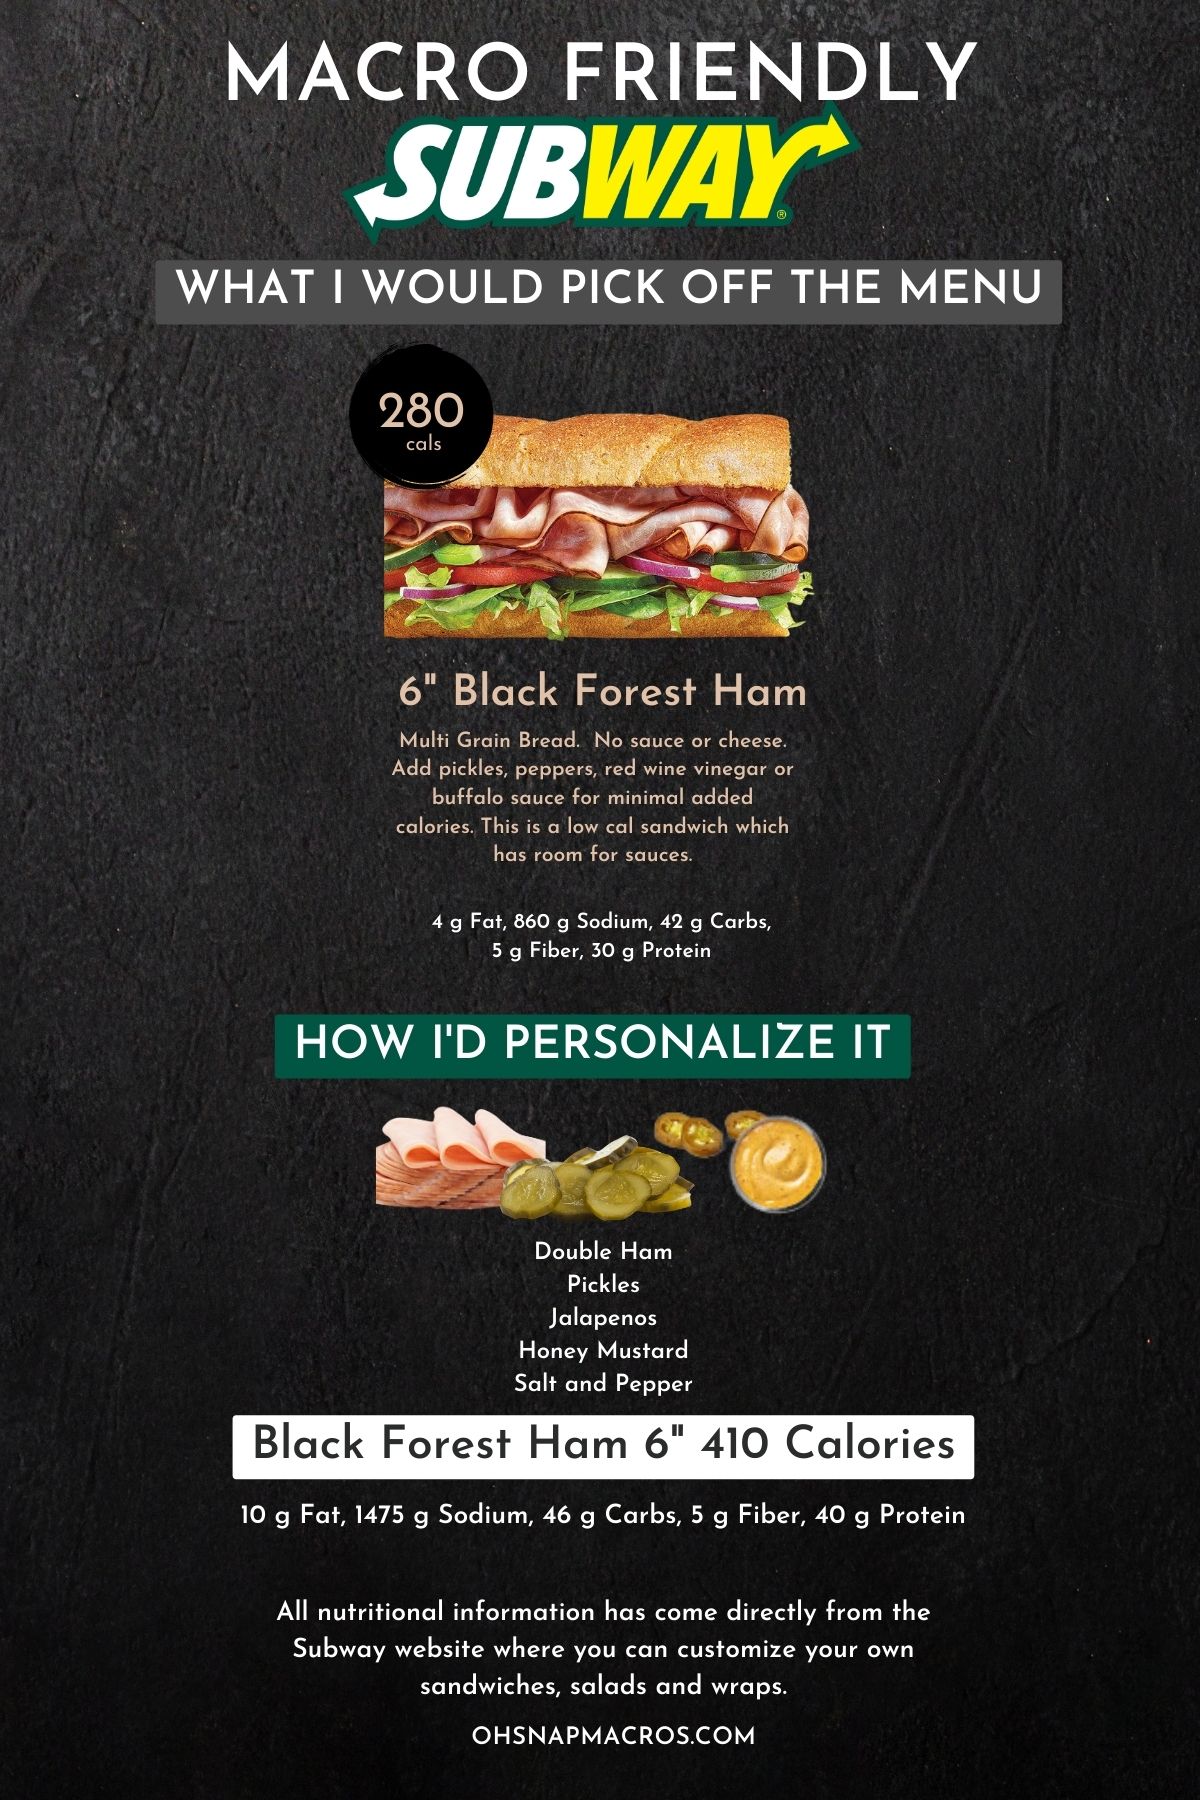 Graphic suggesting a six-inch black forest ham sub personalized with double ham, pickles, jalapenos, honey mustard, salt, and pepper for 410 calories.